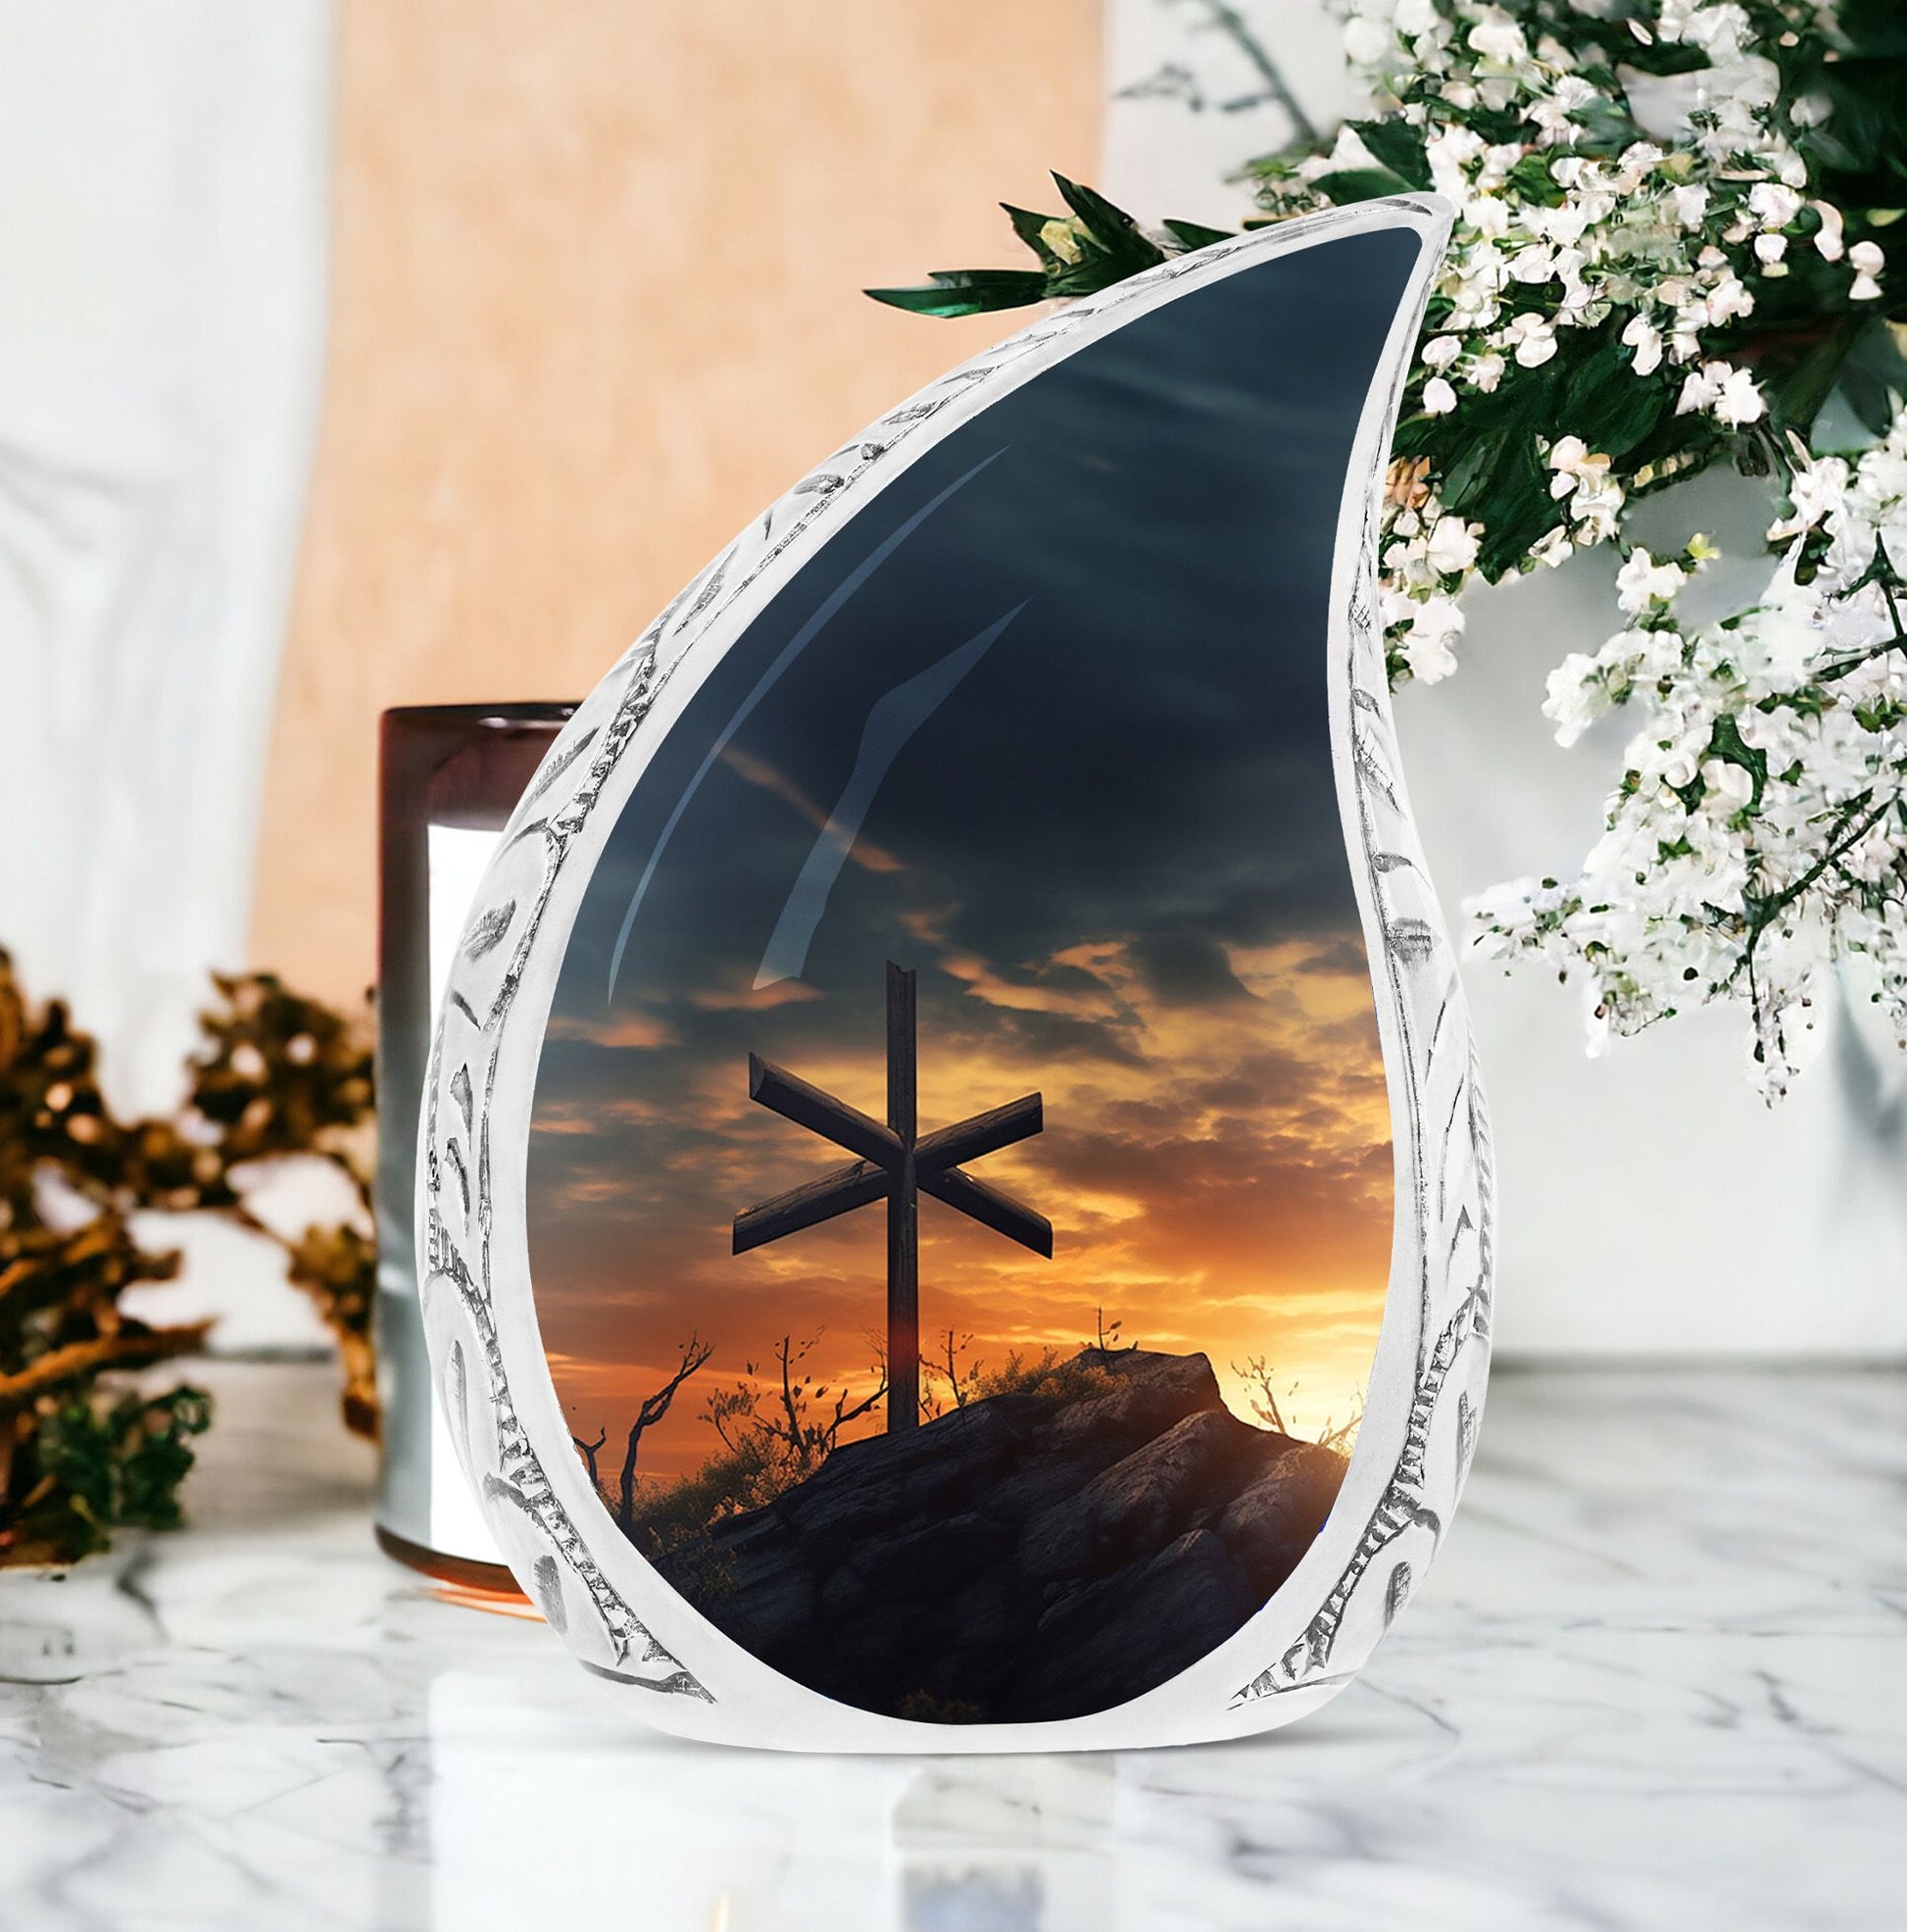 Large Christ themed urn painted with sunset sky, designed for human ashes, suitable for women and burial purposes